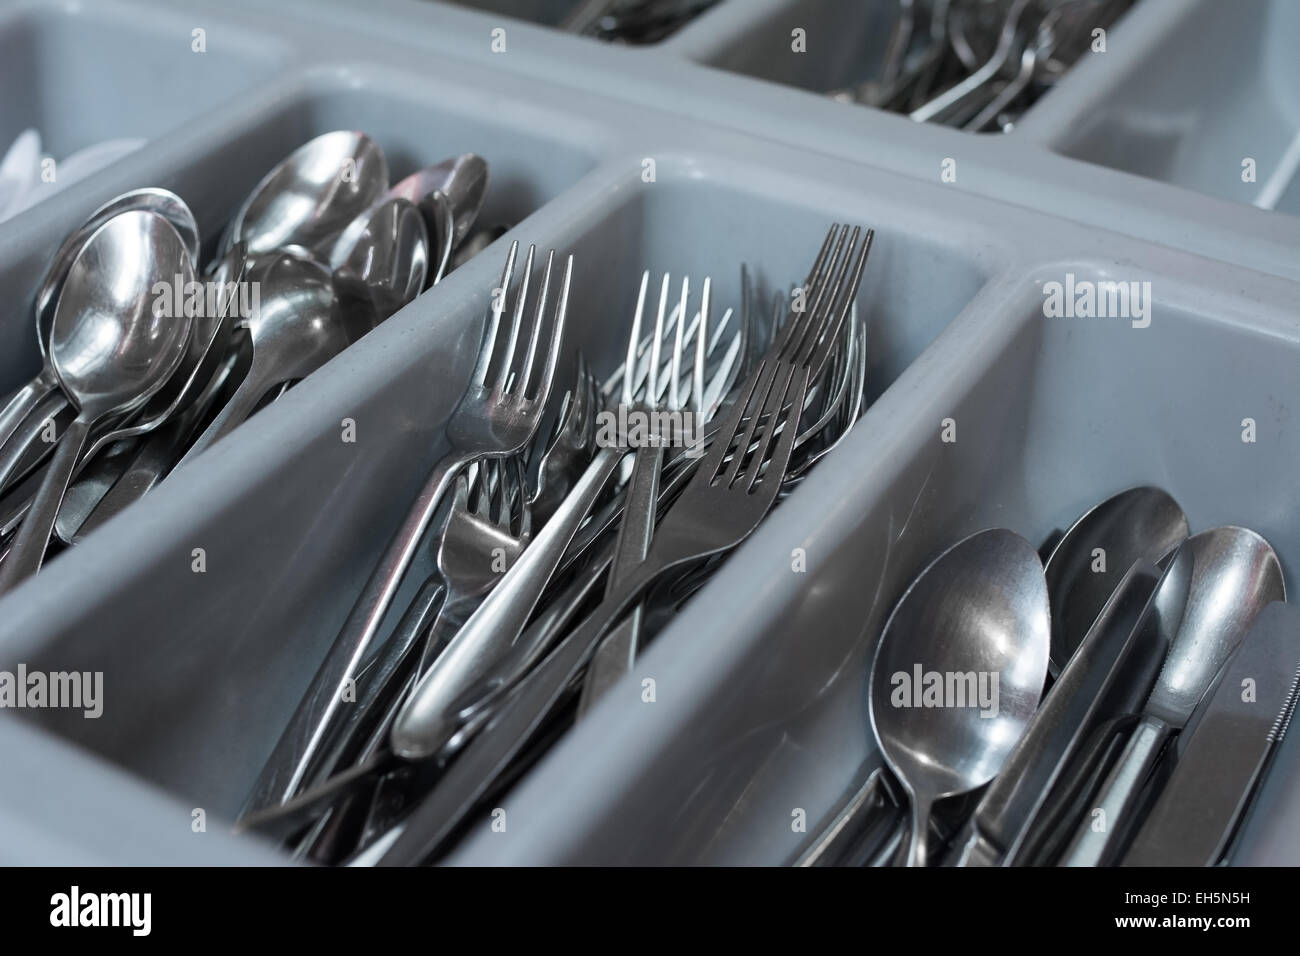 Restaurant Cutlery In A Tray Stock Photo